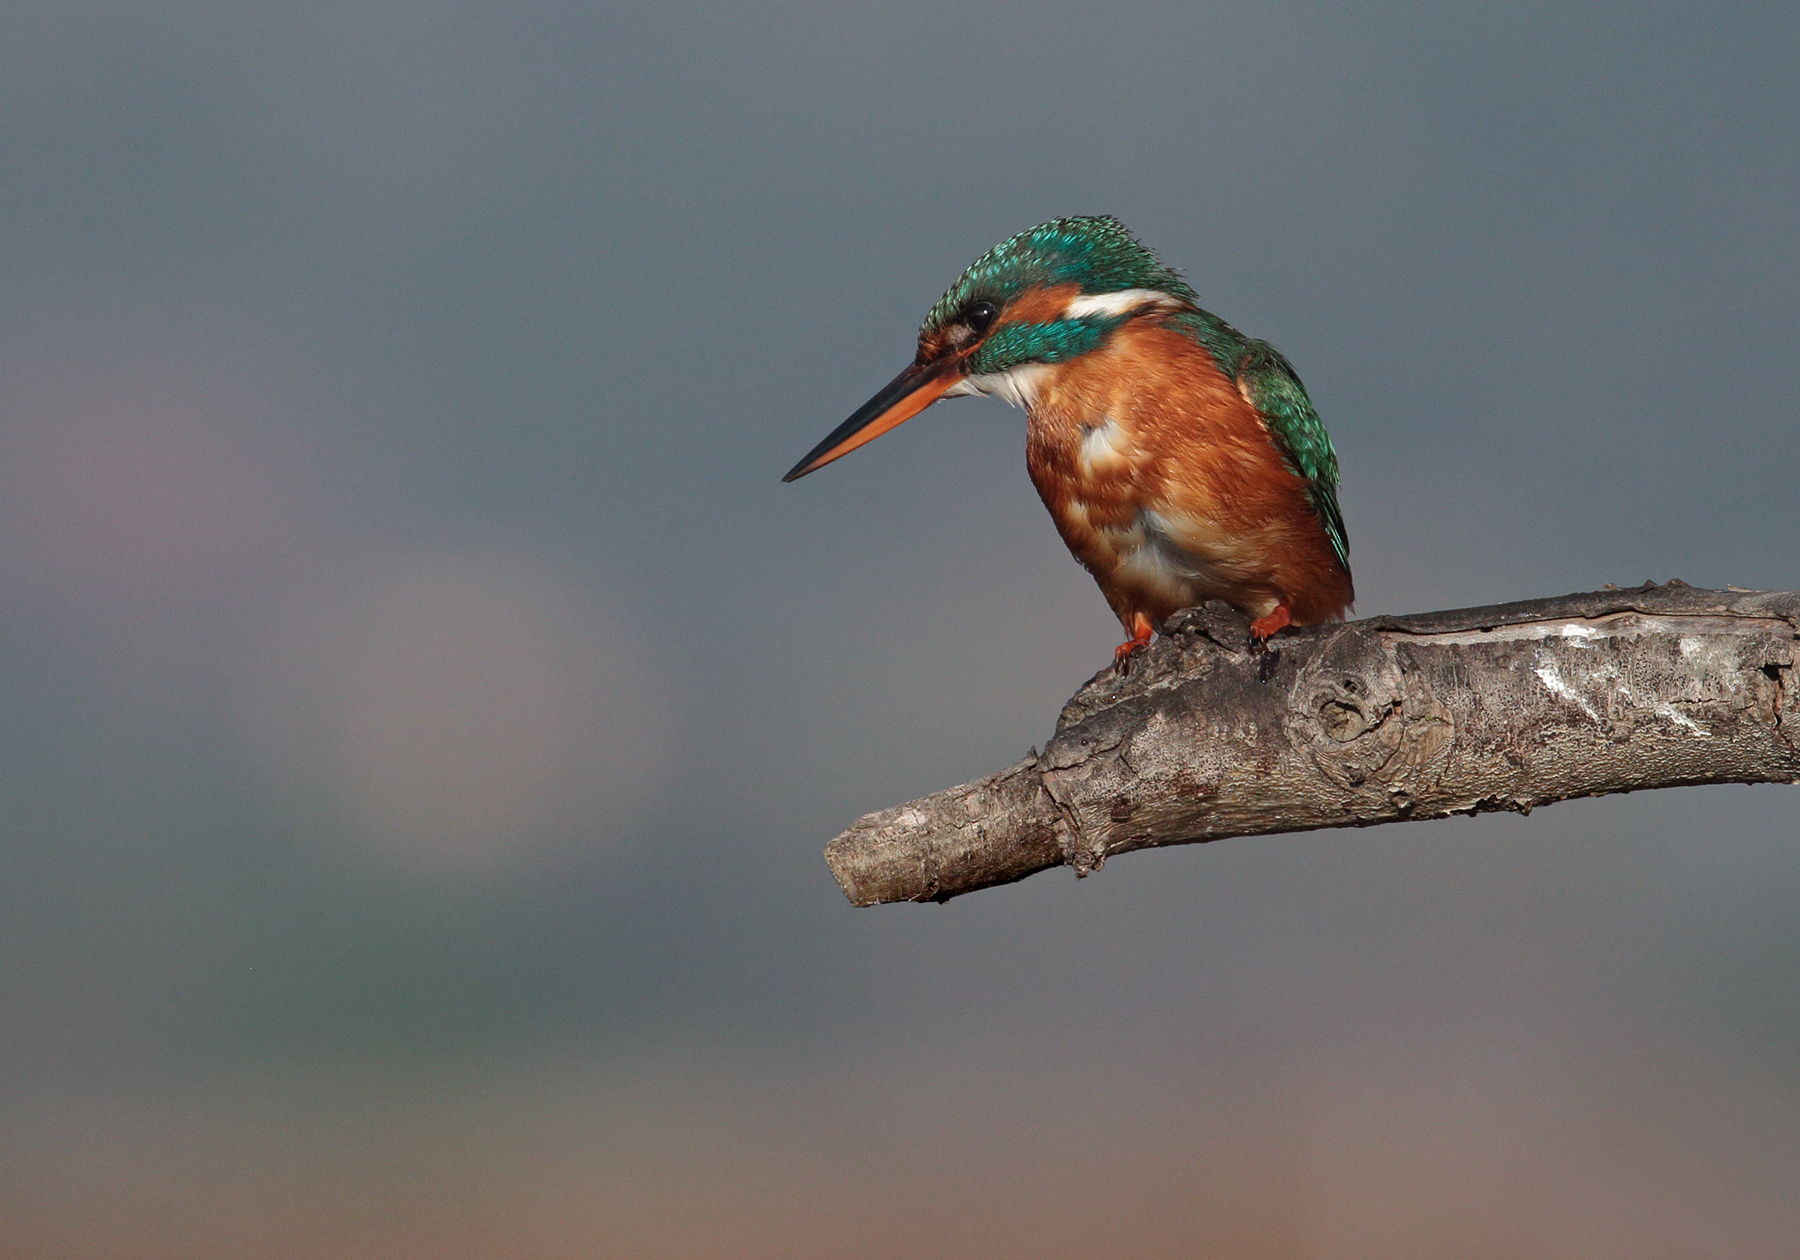 Kingfisher with mist, natural perch...